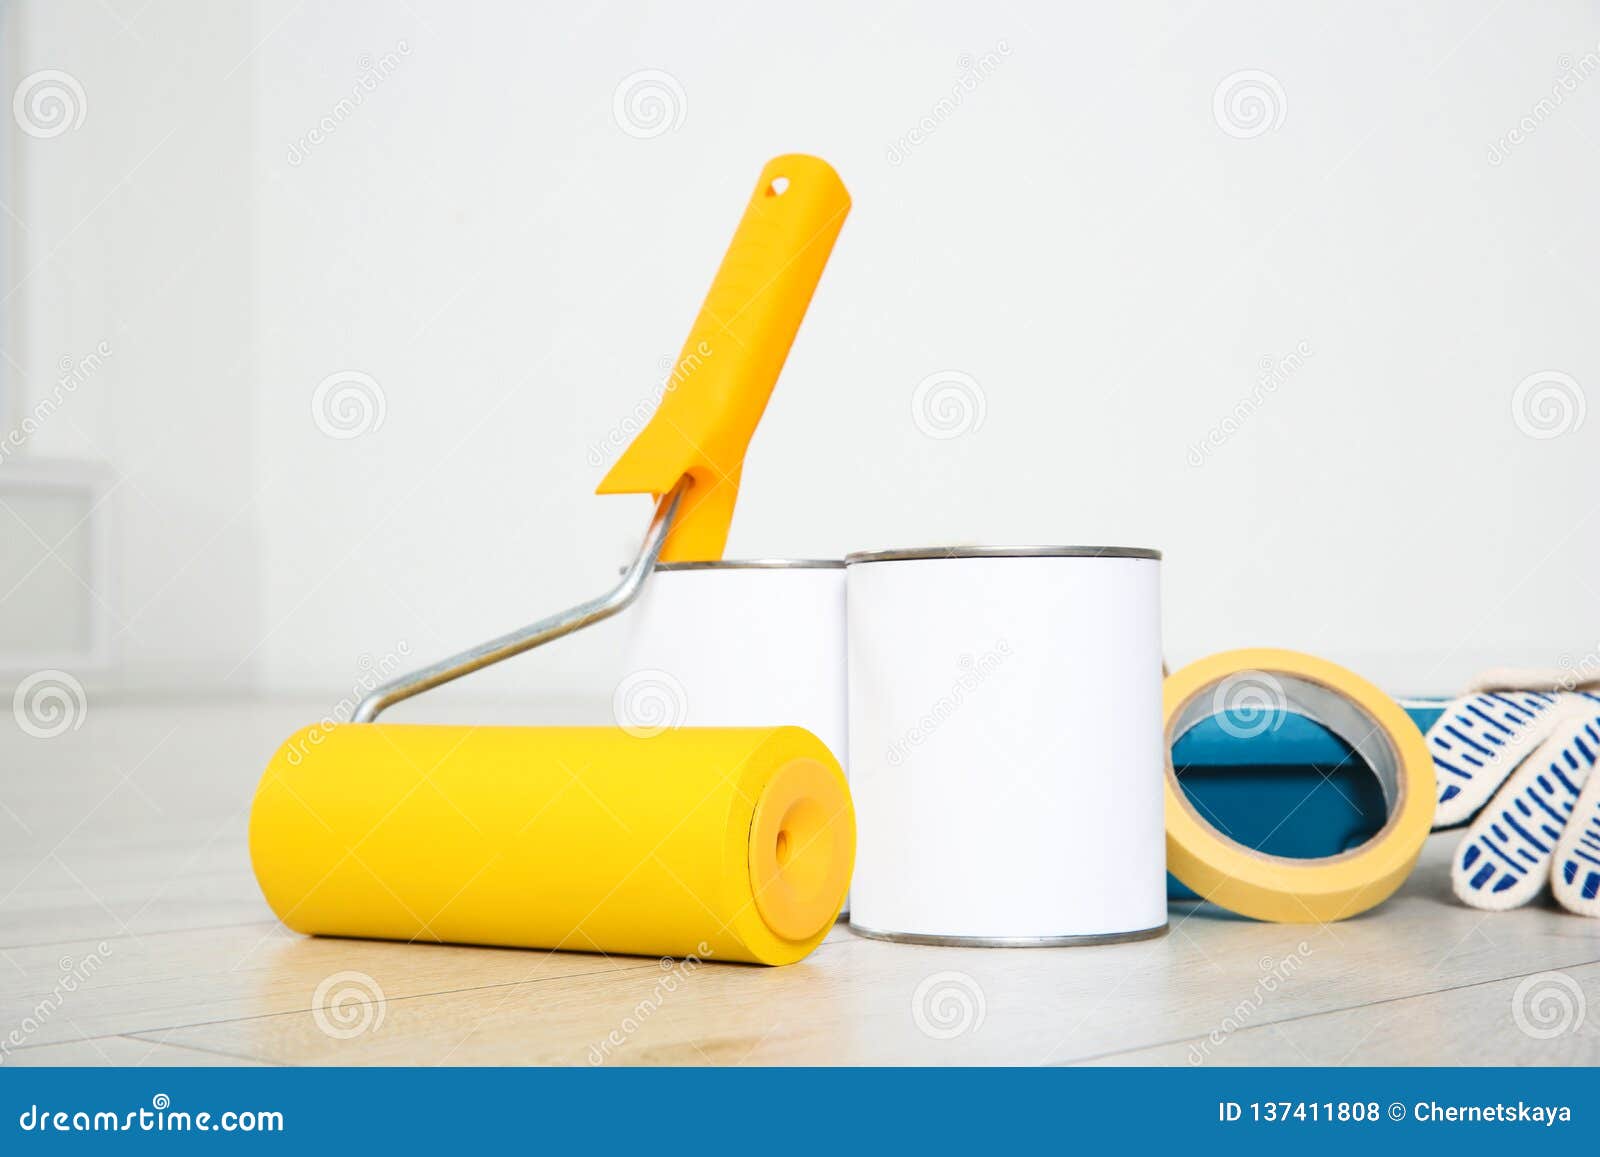 Cans of Paint and Decorator Tools Stock Photo - Image of interior ...